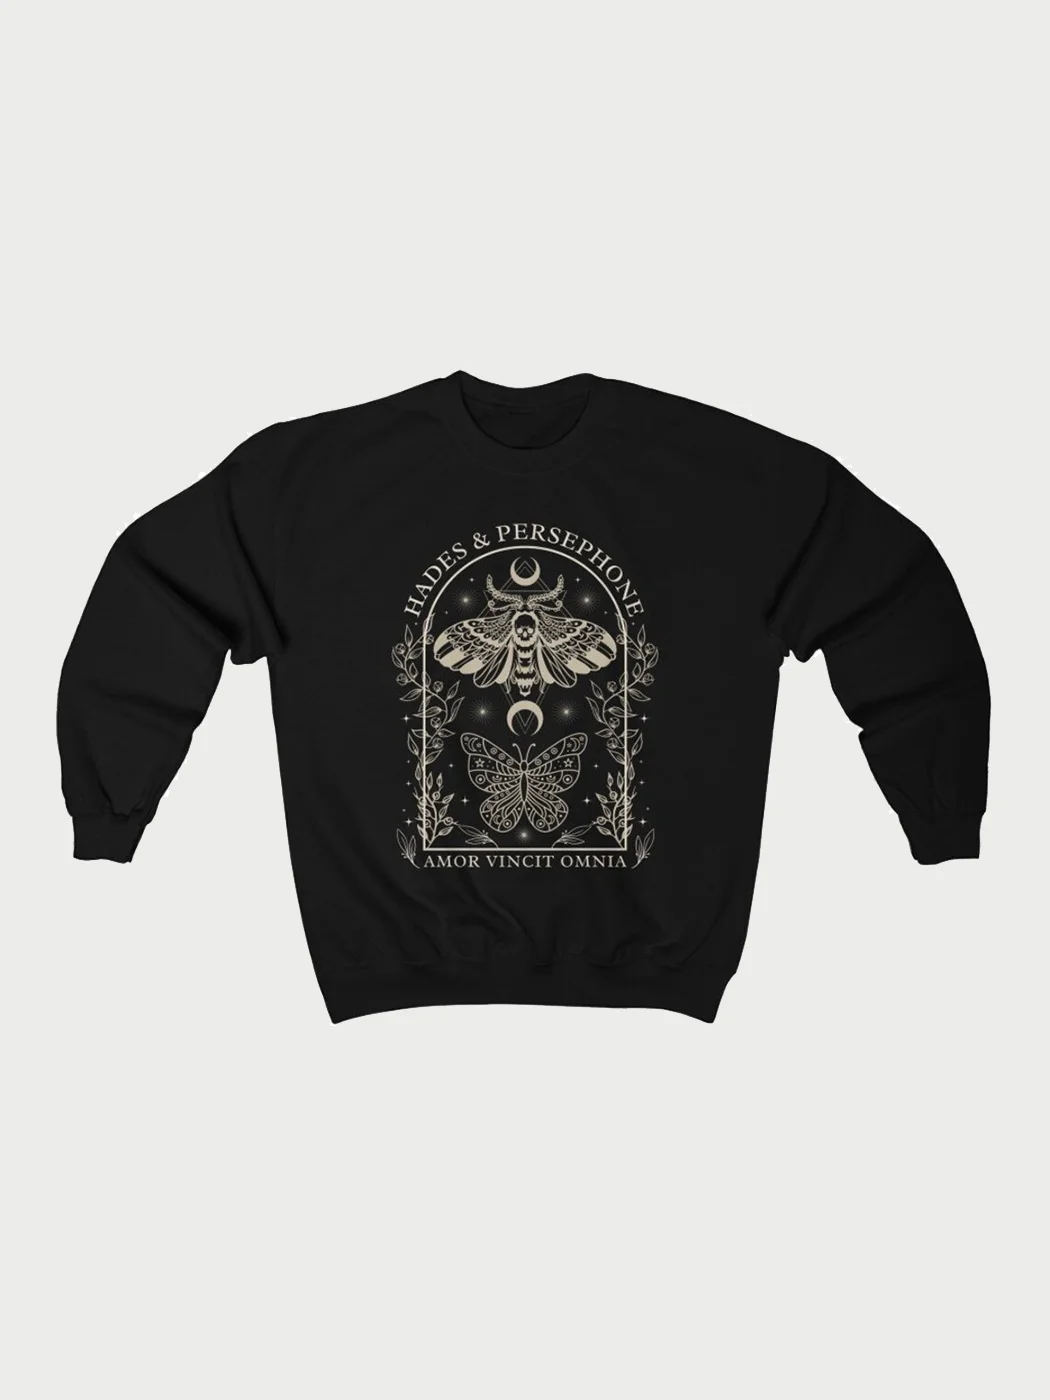 Hades And Persephone Moth And Butterfly Mythology Sweater